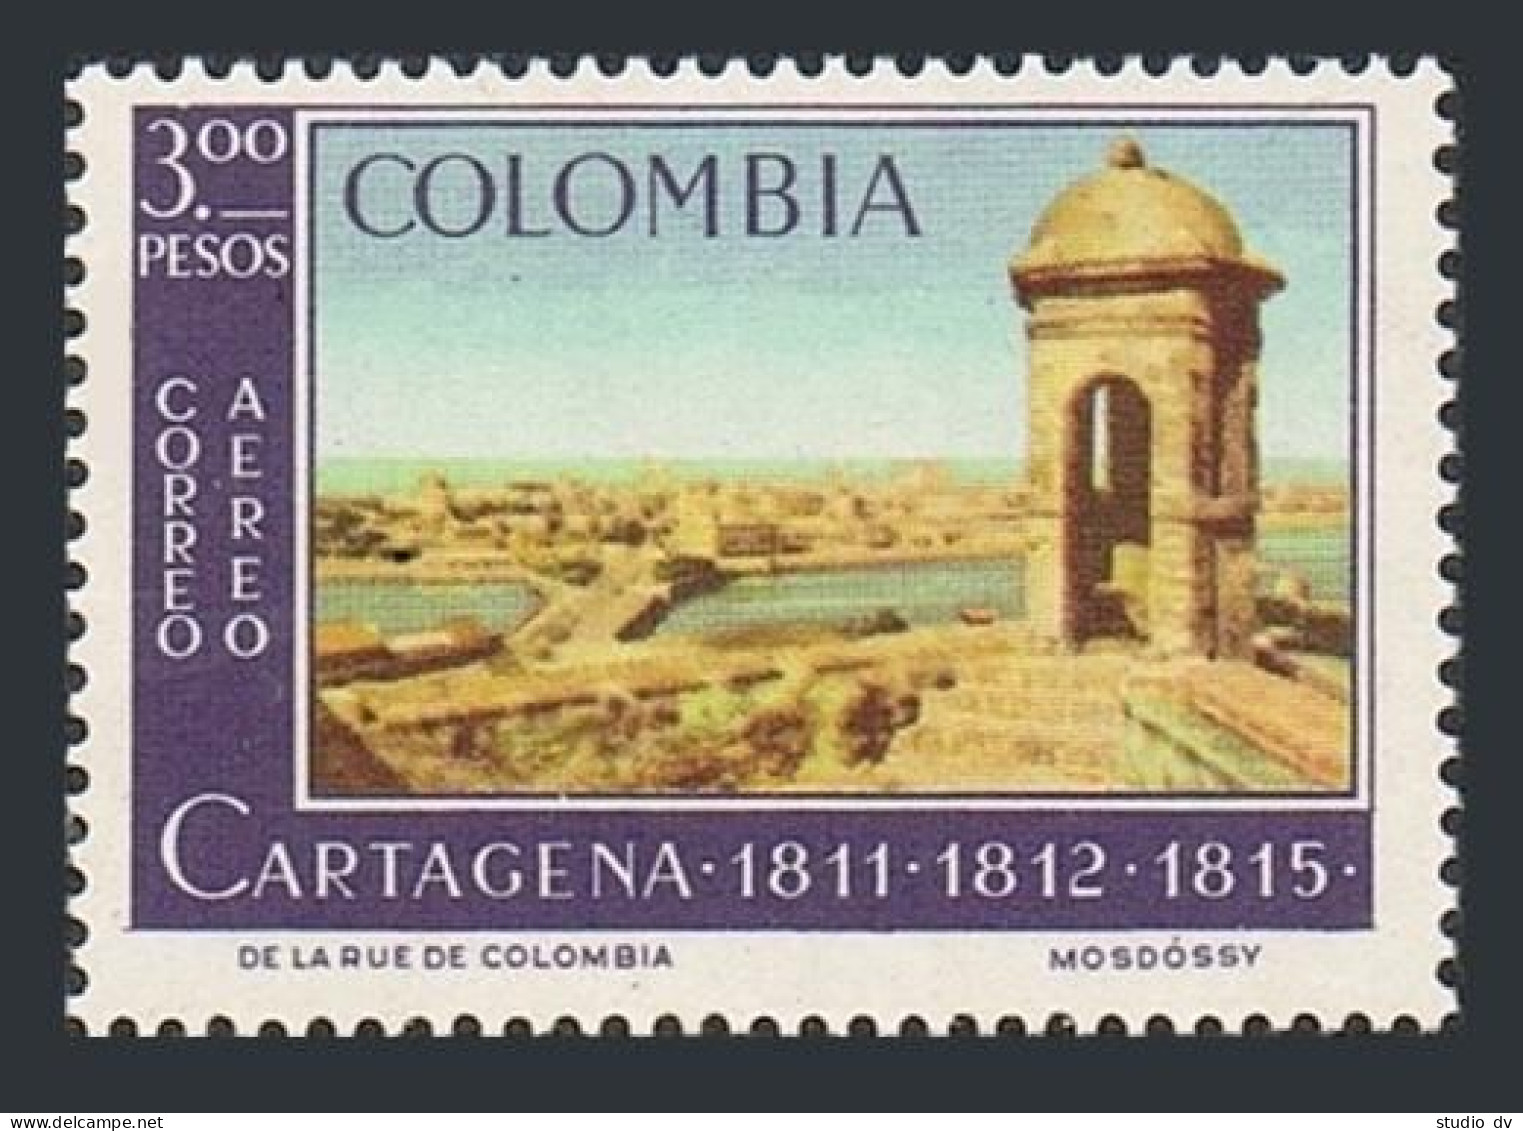 Colombia C461,MNH.Michel 1054. Cartagena's Independence In 1811.1964. - Colombie